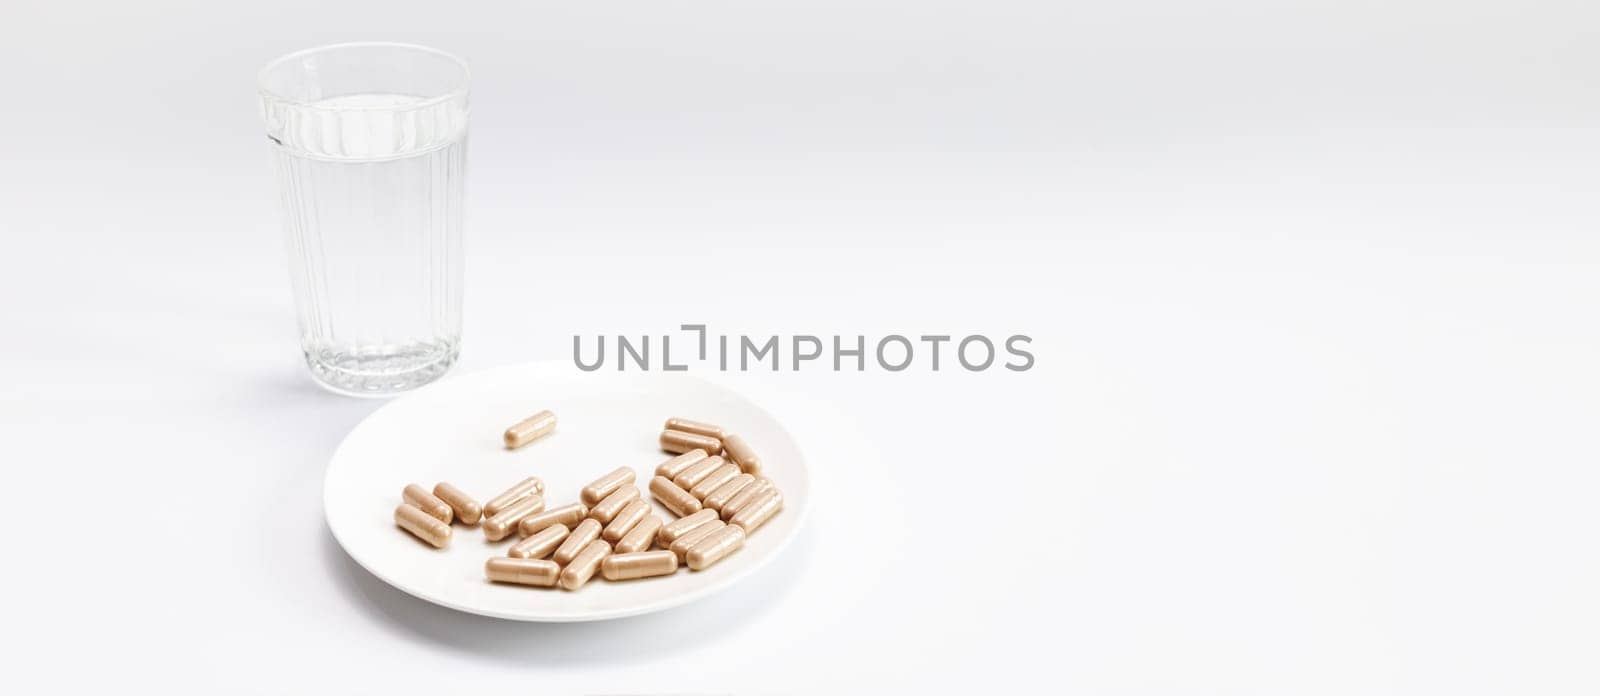 Banner Group Of Slippery Elm Capsules on plate, Glass Of Water On White Background. Traditional, dietary supplement. Holistic remedy, medication Horizontal Plane, Copy Space For Text by netatsi